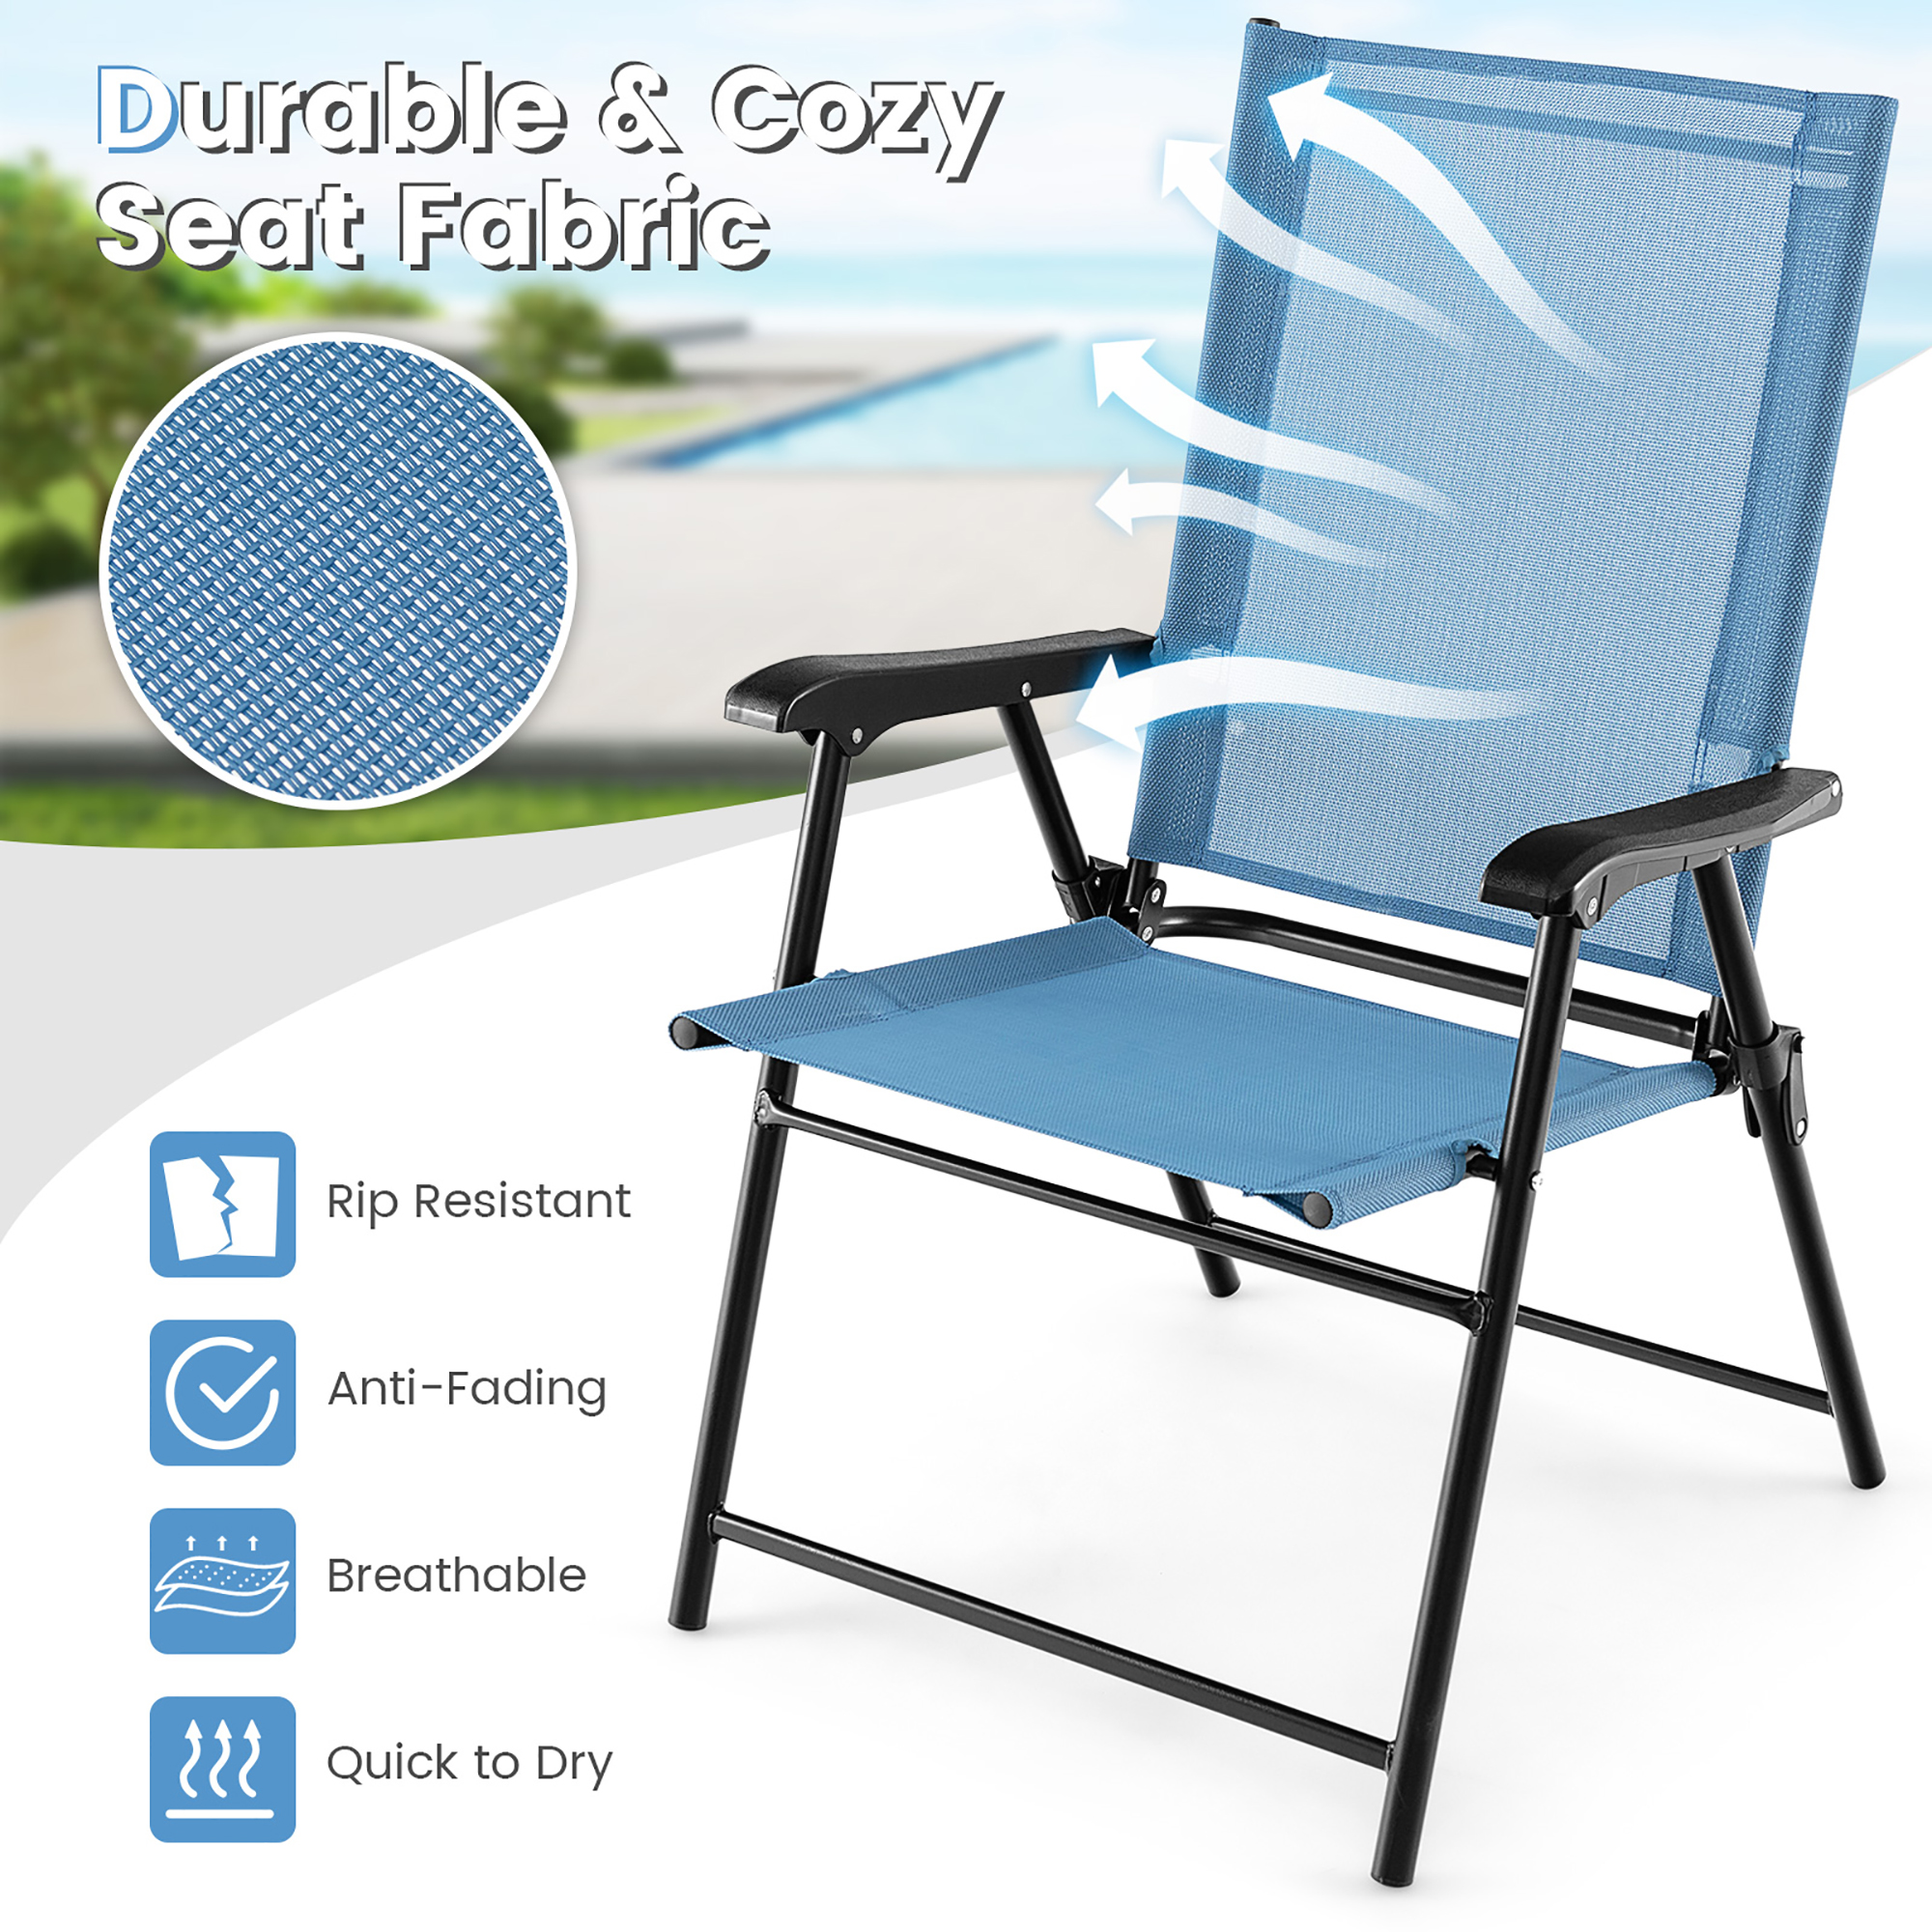 Gymax Set of 4 Patio Folding Chairs Outdoor Portable Pack Lawn Chairs w/ Armrests Blue - image 5 of 10